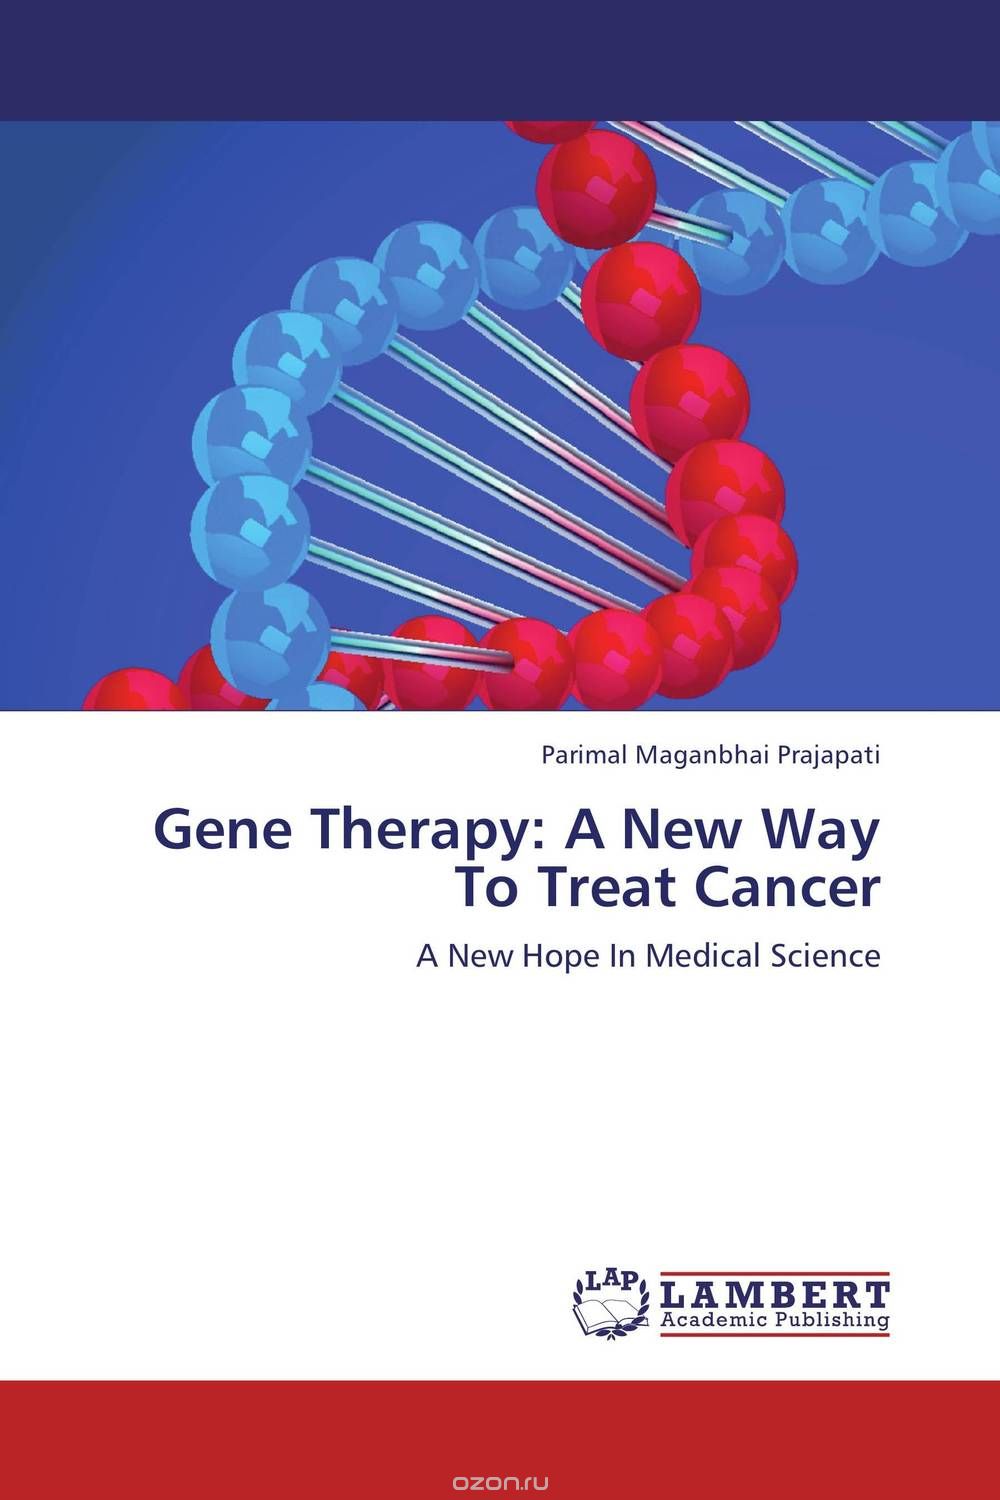 Gene Therapy: A New Way To Treat Cancer